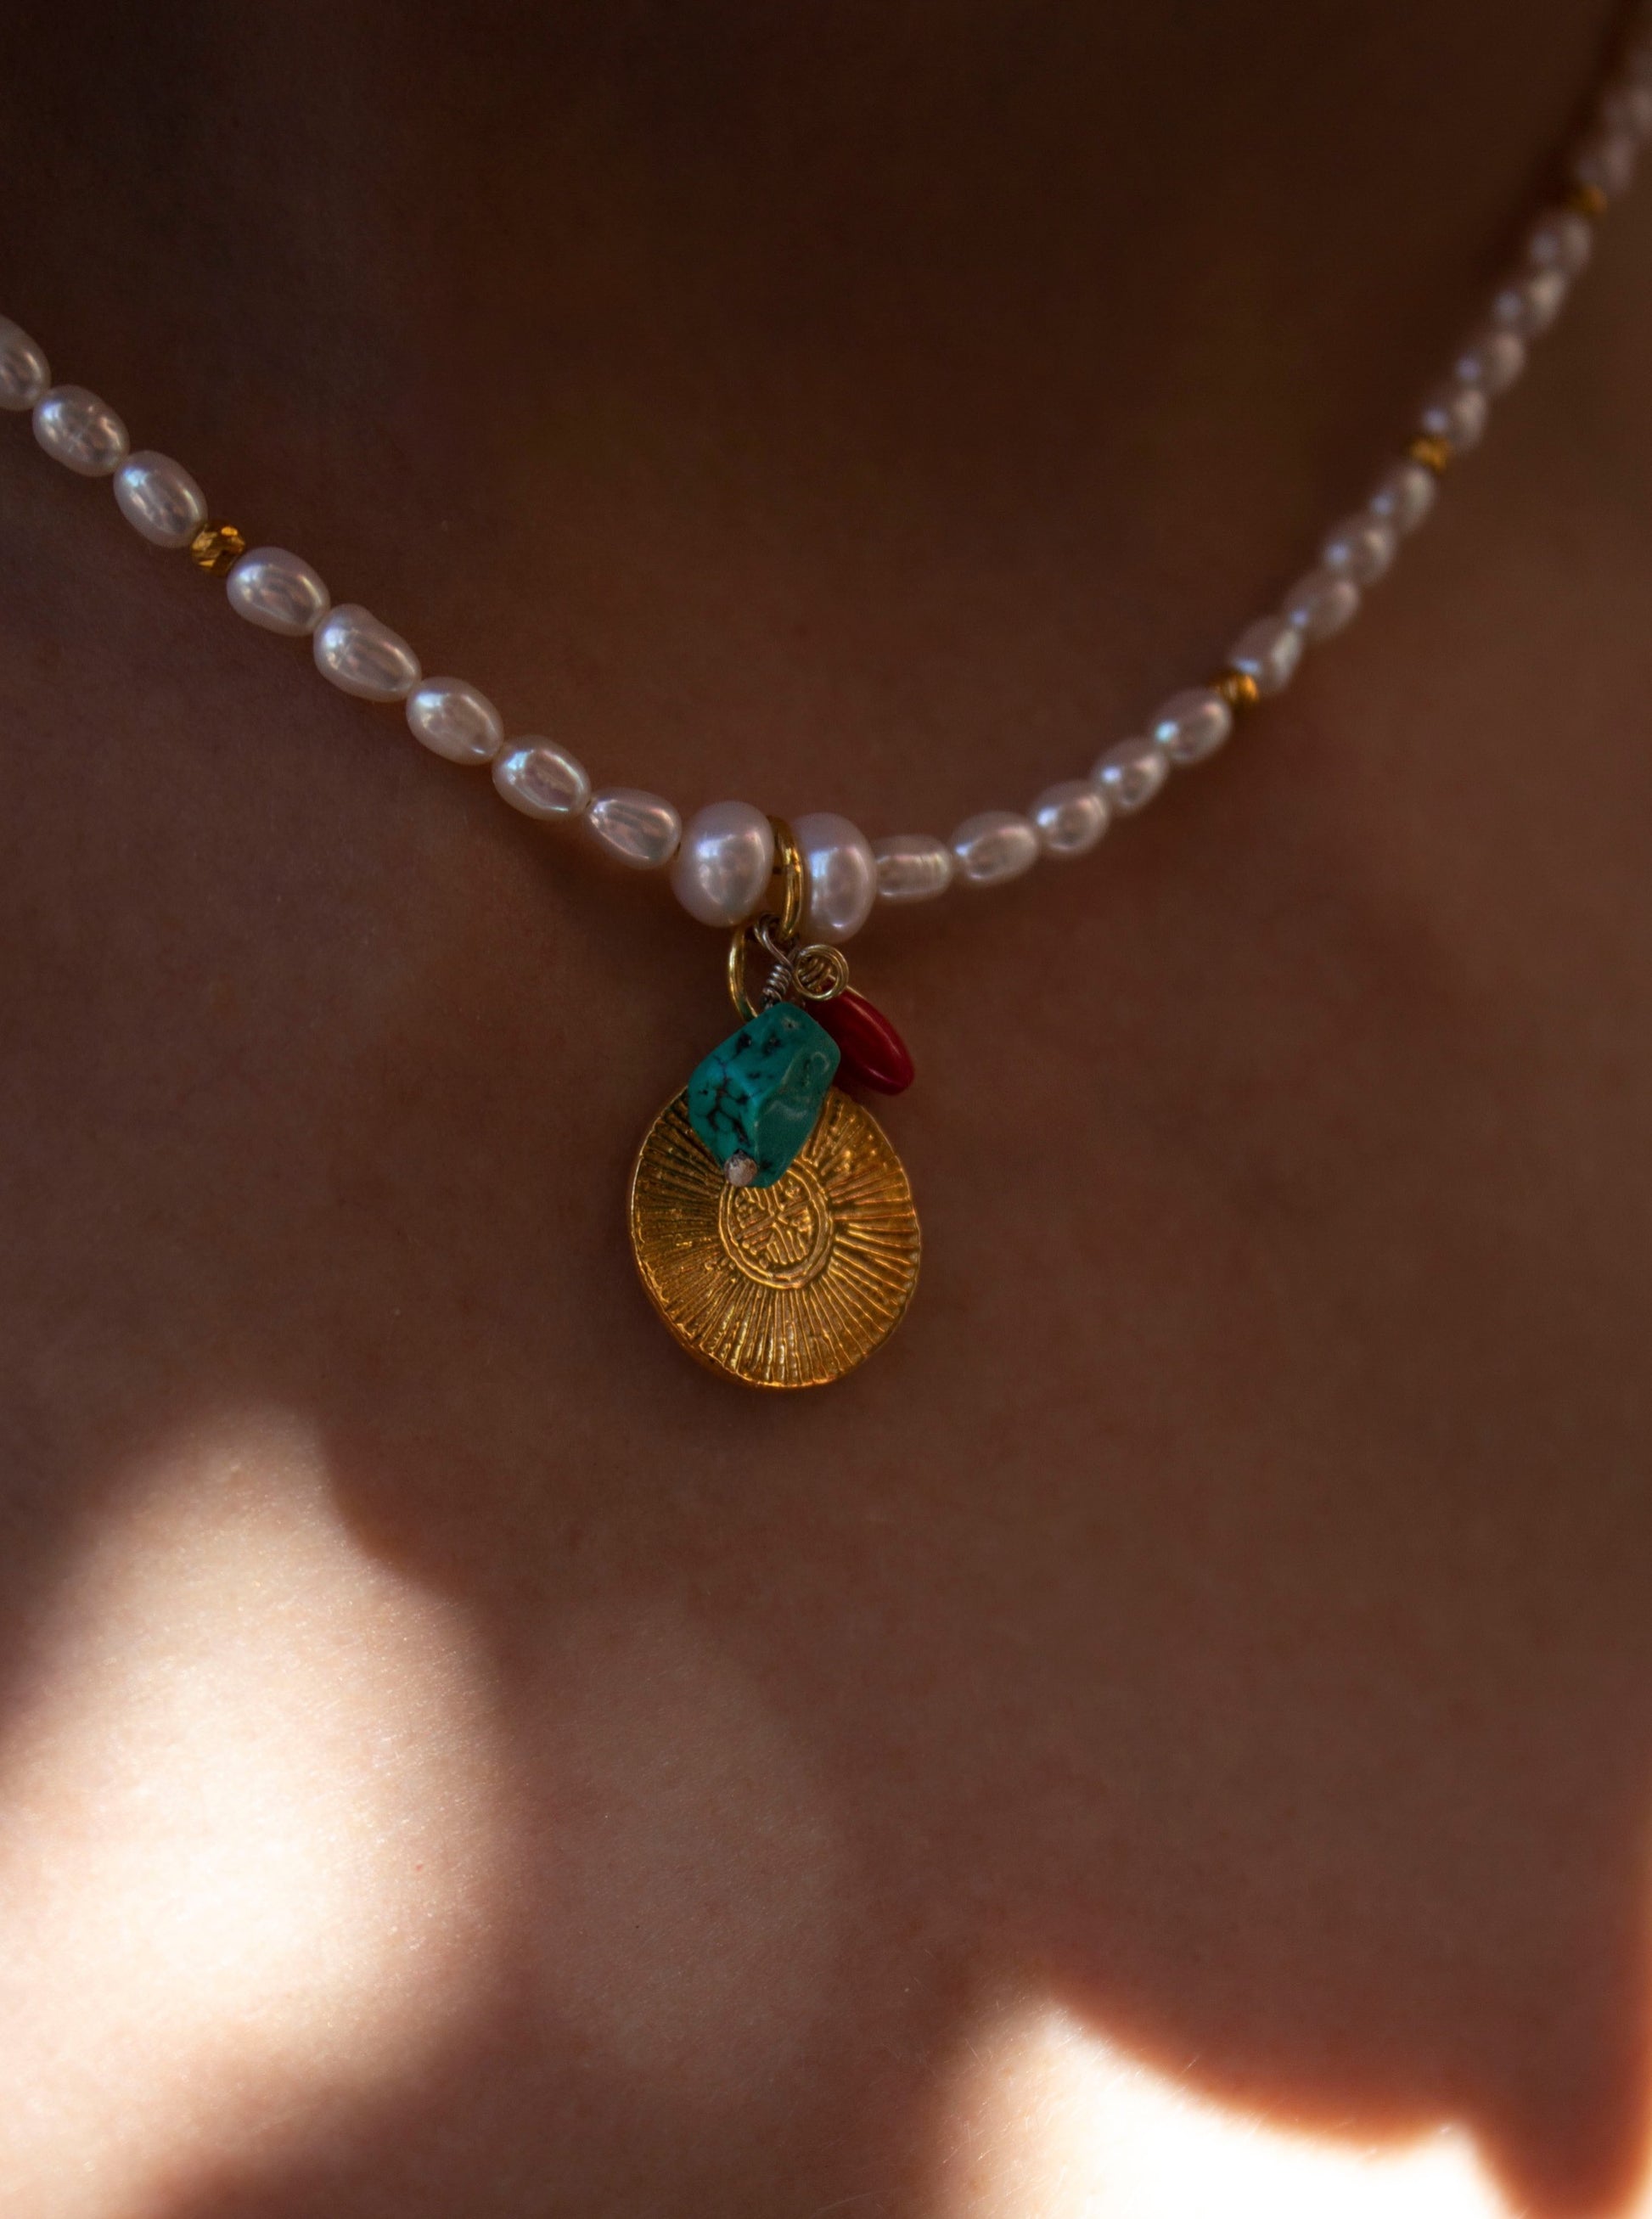 Detail of the Cybele necklace, showing the symbol of sun, the turquoise and coral